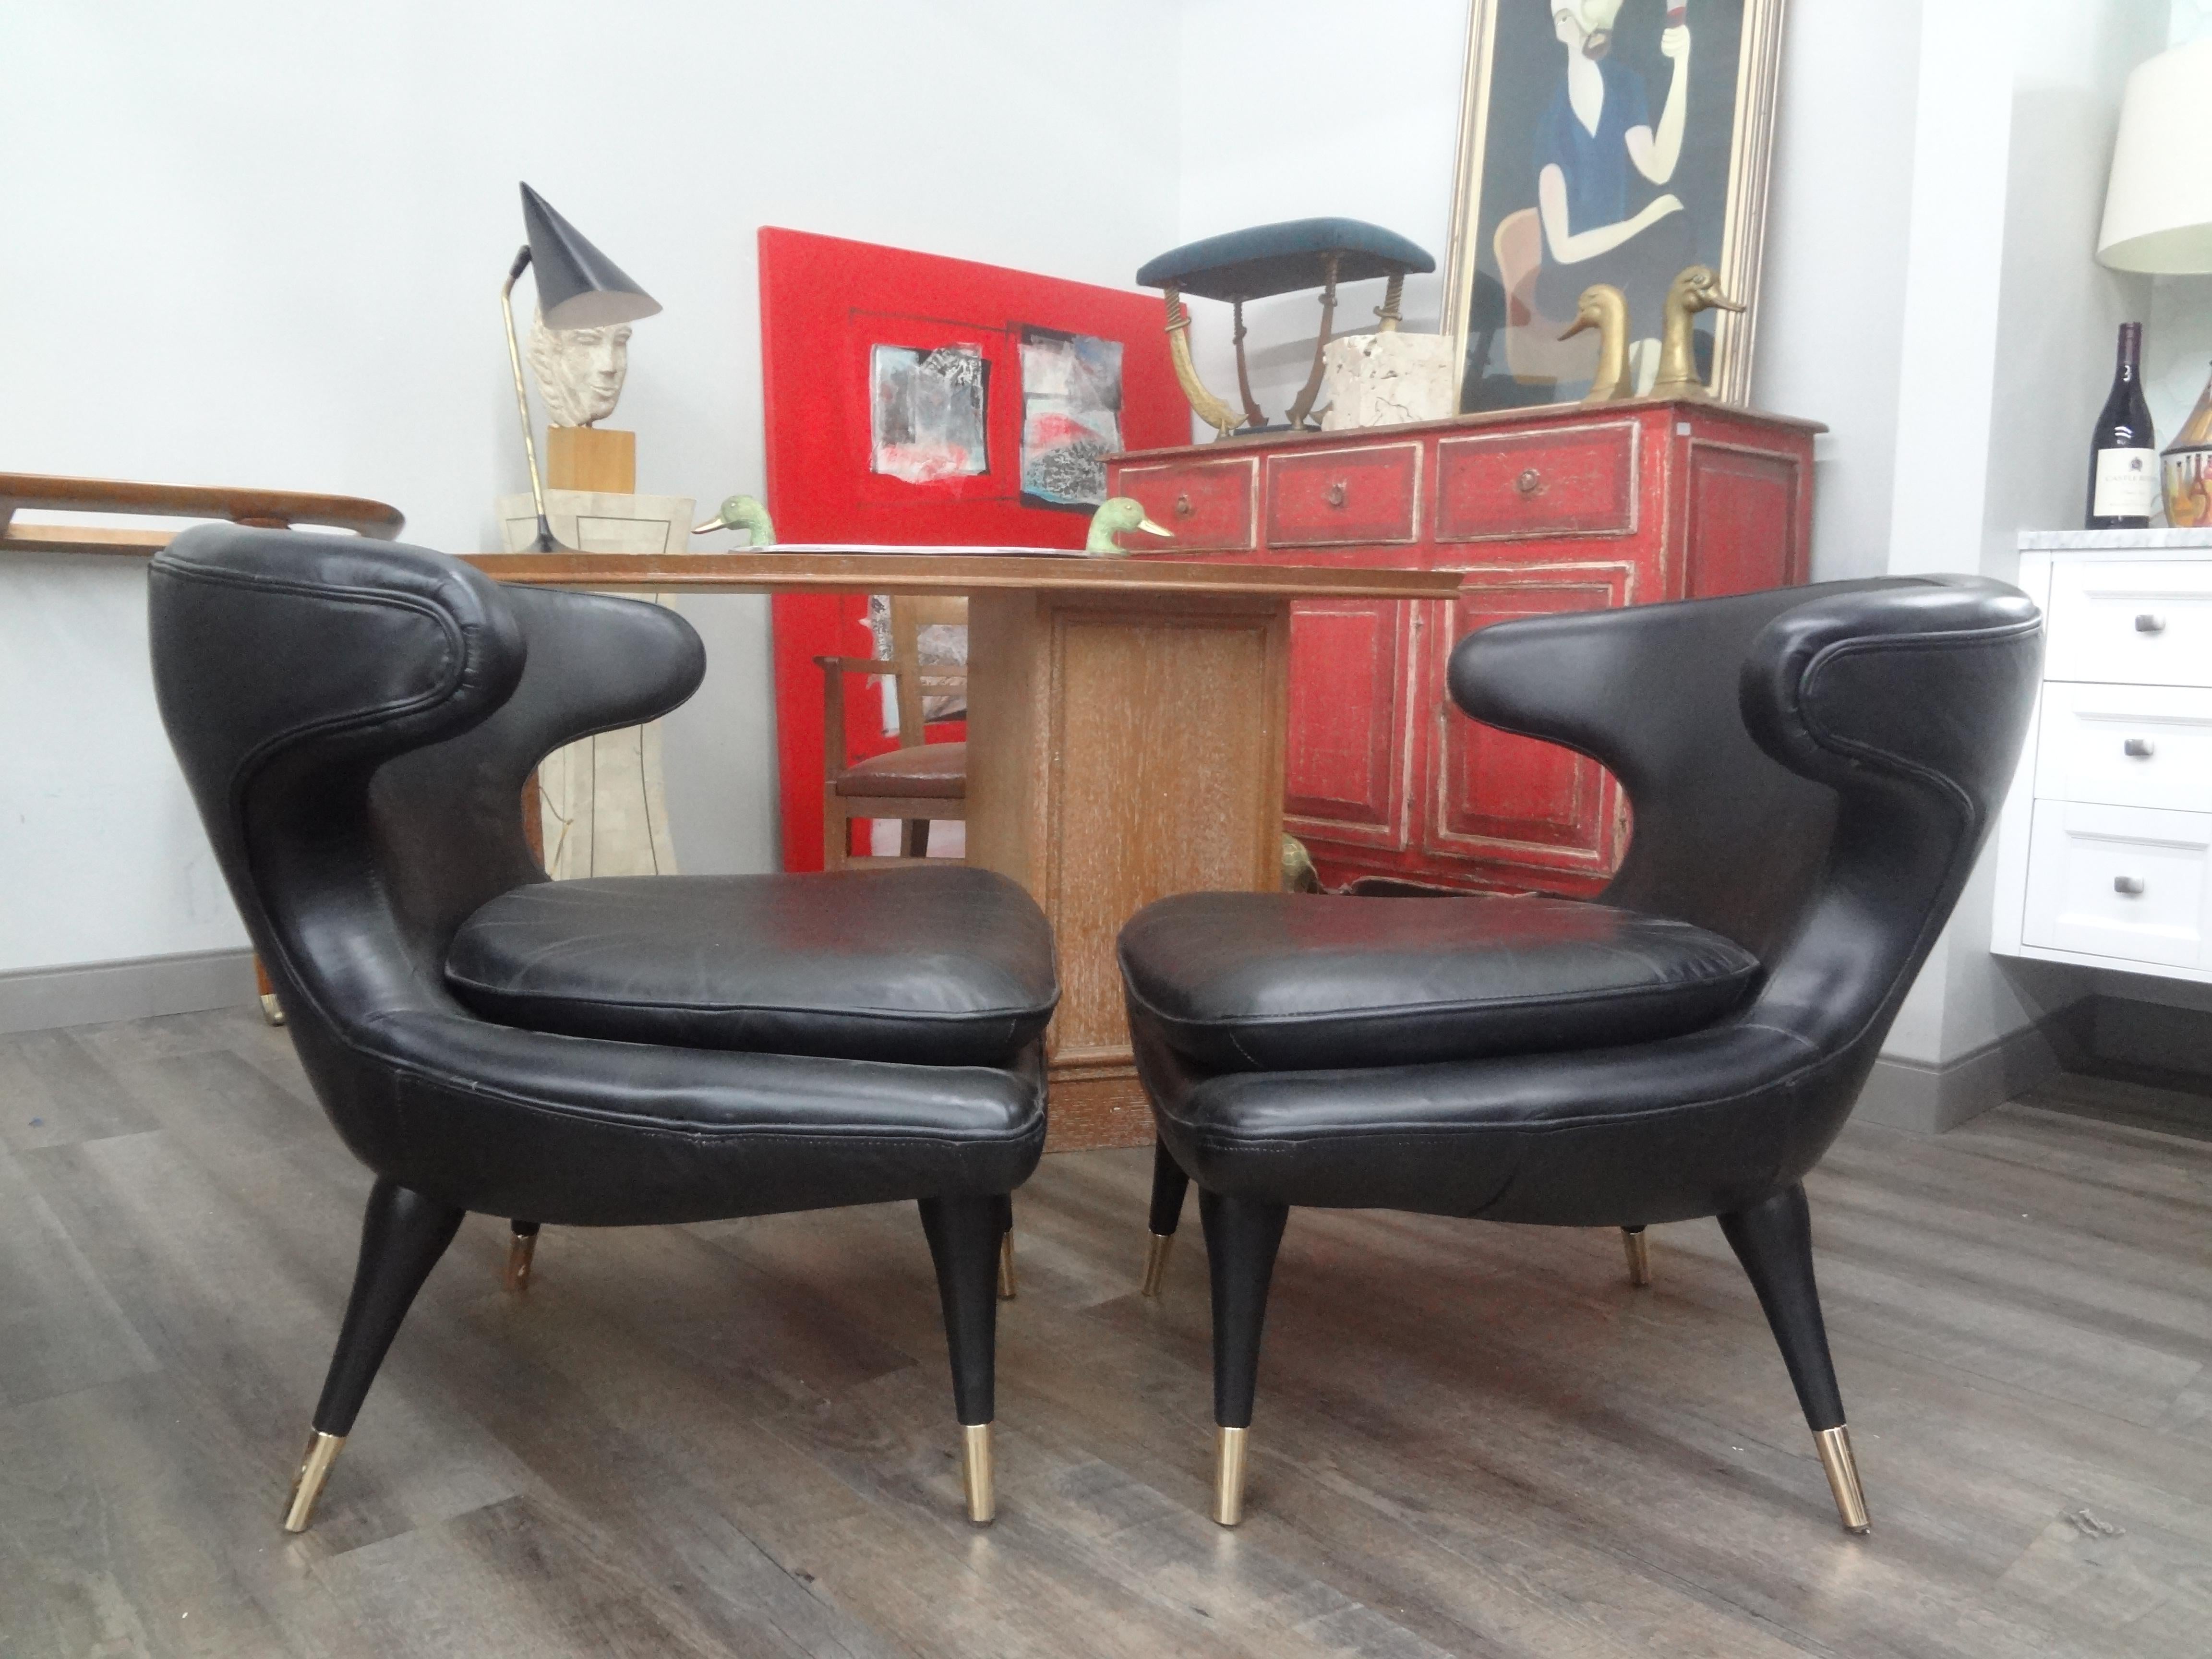 Pair of Italian Modern curved back chairs upholstered in black leather.
These unique sculptural Italian lounge chairs have beautifully tapered legs with brass sabots. They are upholstered in black leather and are extremely comfortable.
The curved